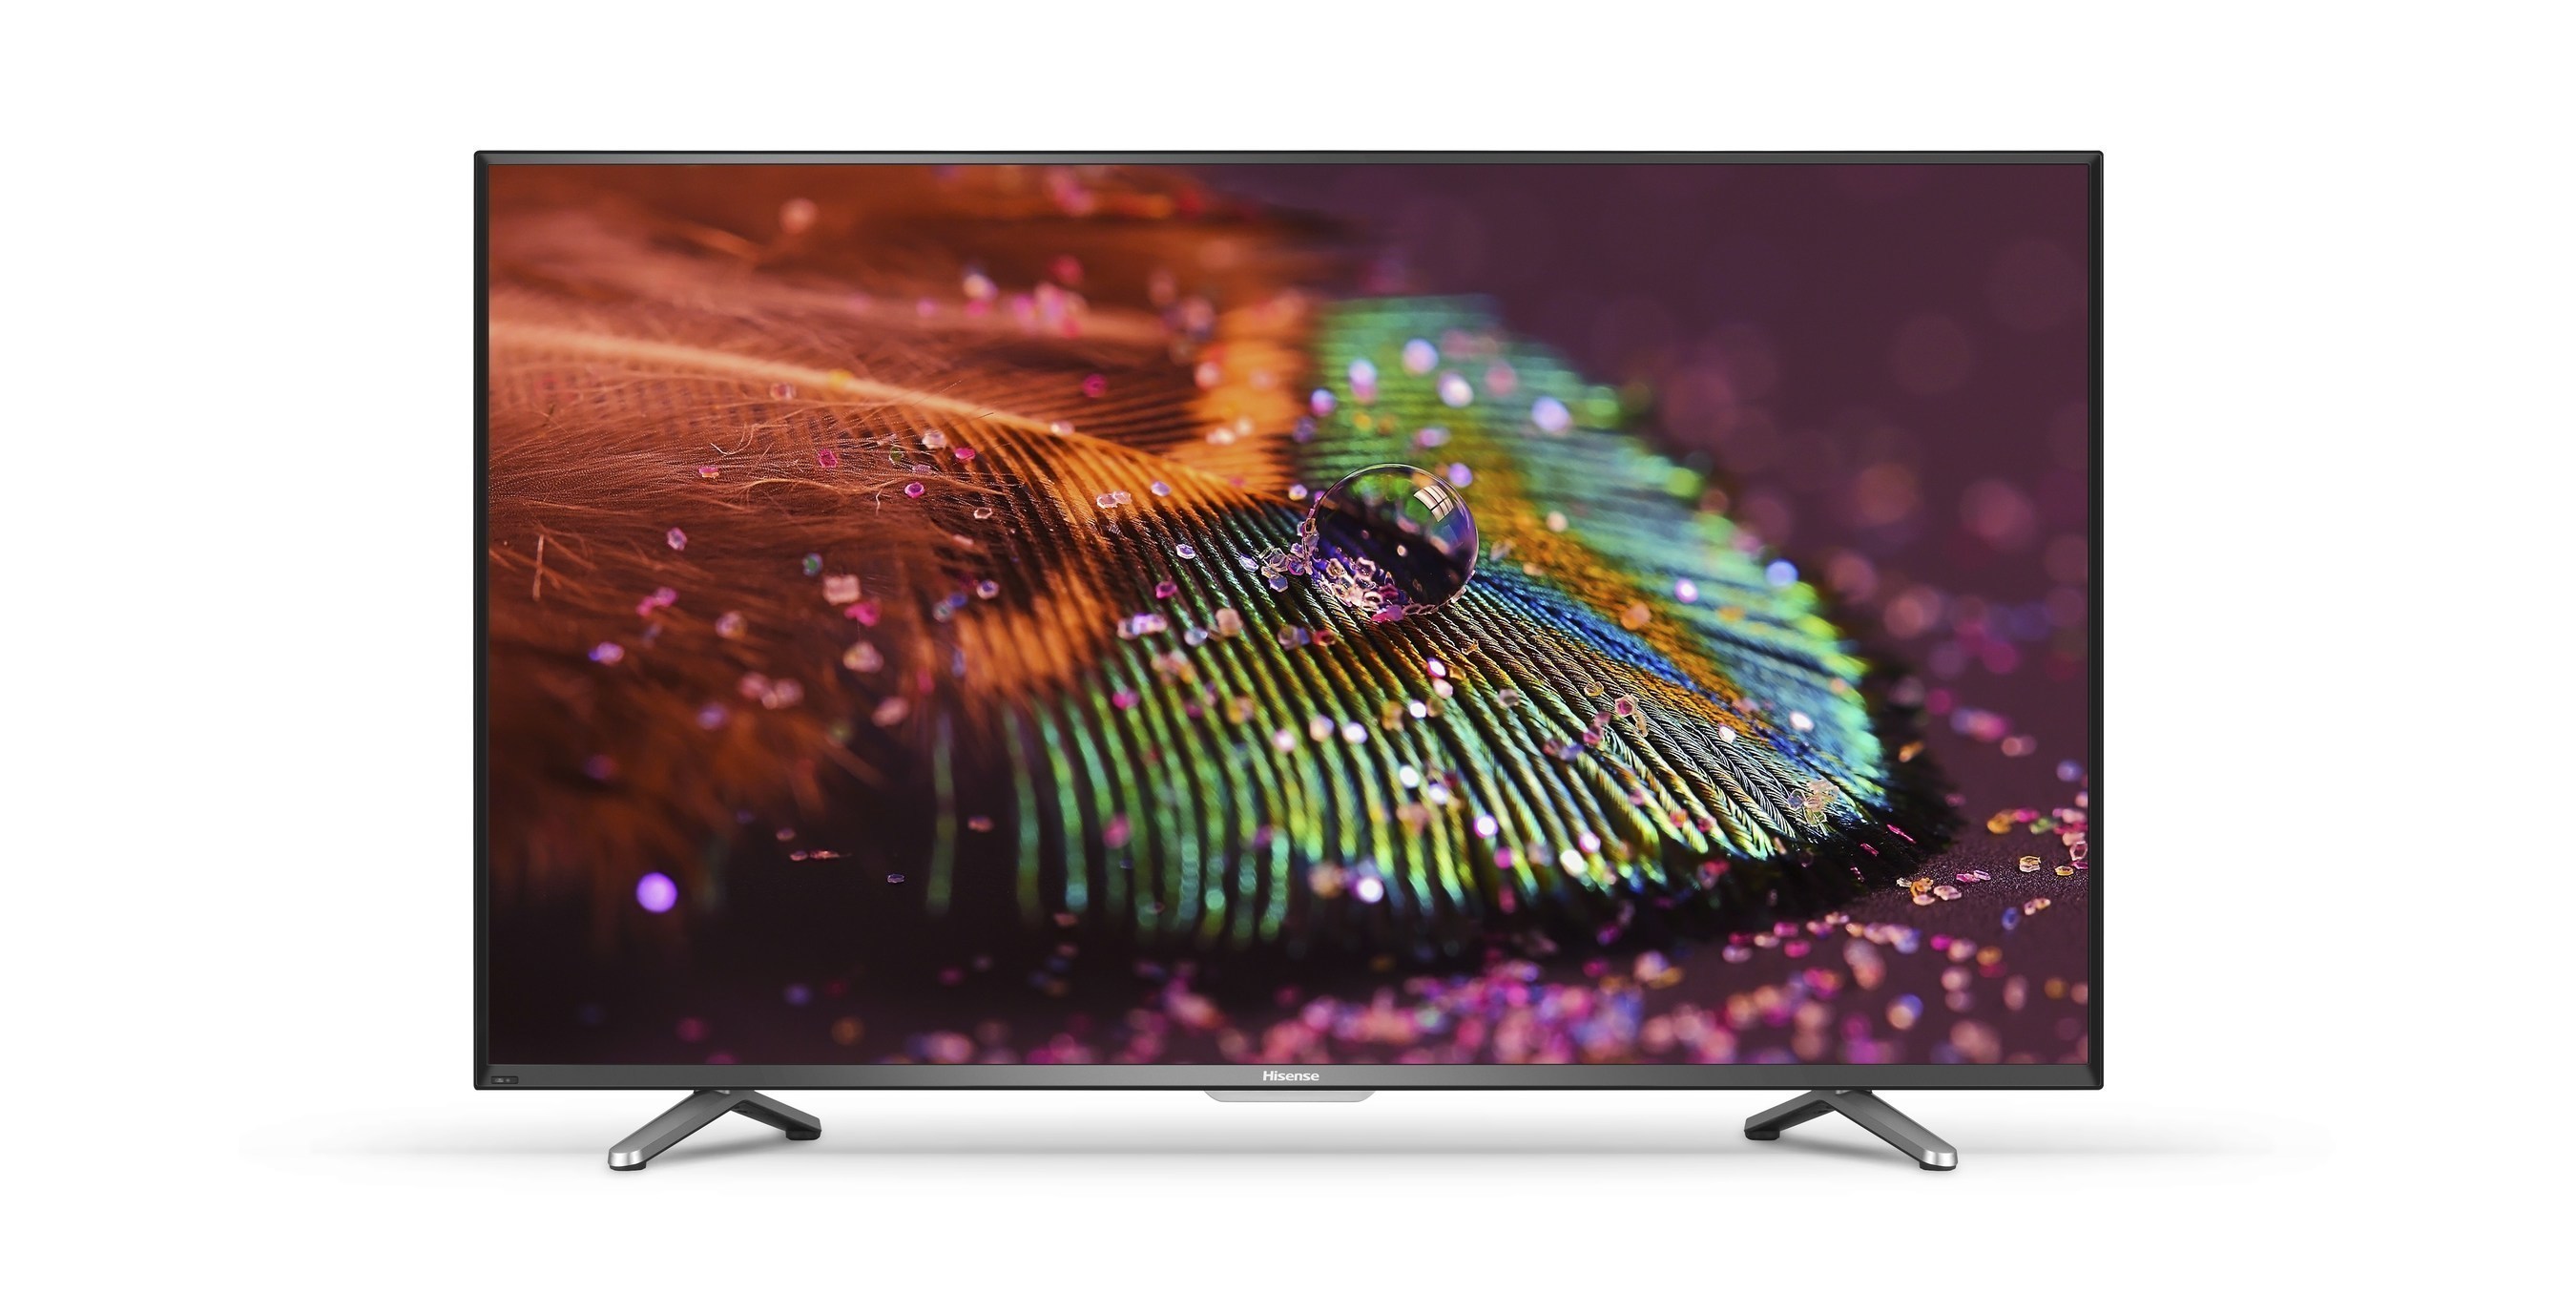 The Hisense H7 Series 50" 4K UltraHD Smart TV will be available in over 2,000 Walmart stores and on Walmart.com for the affordable price of $598 beginning in June.